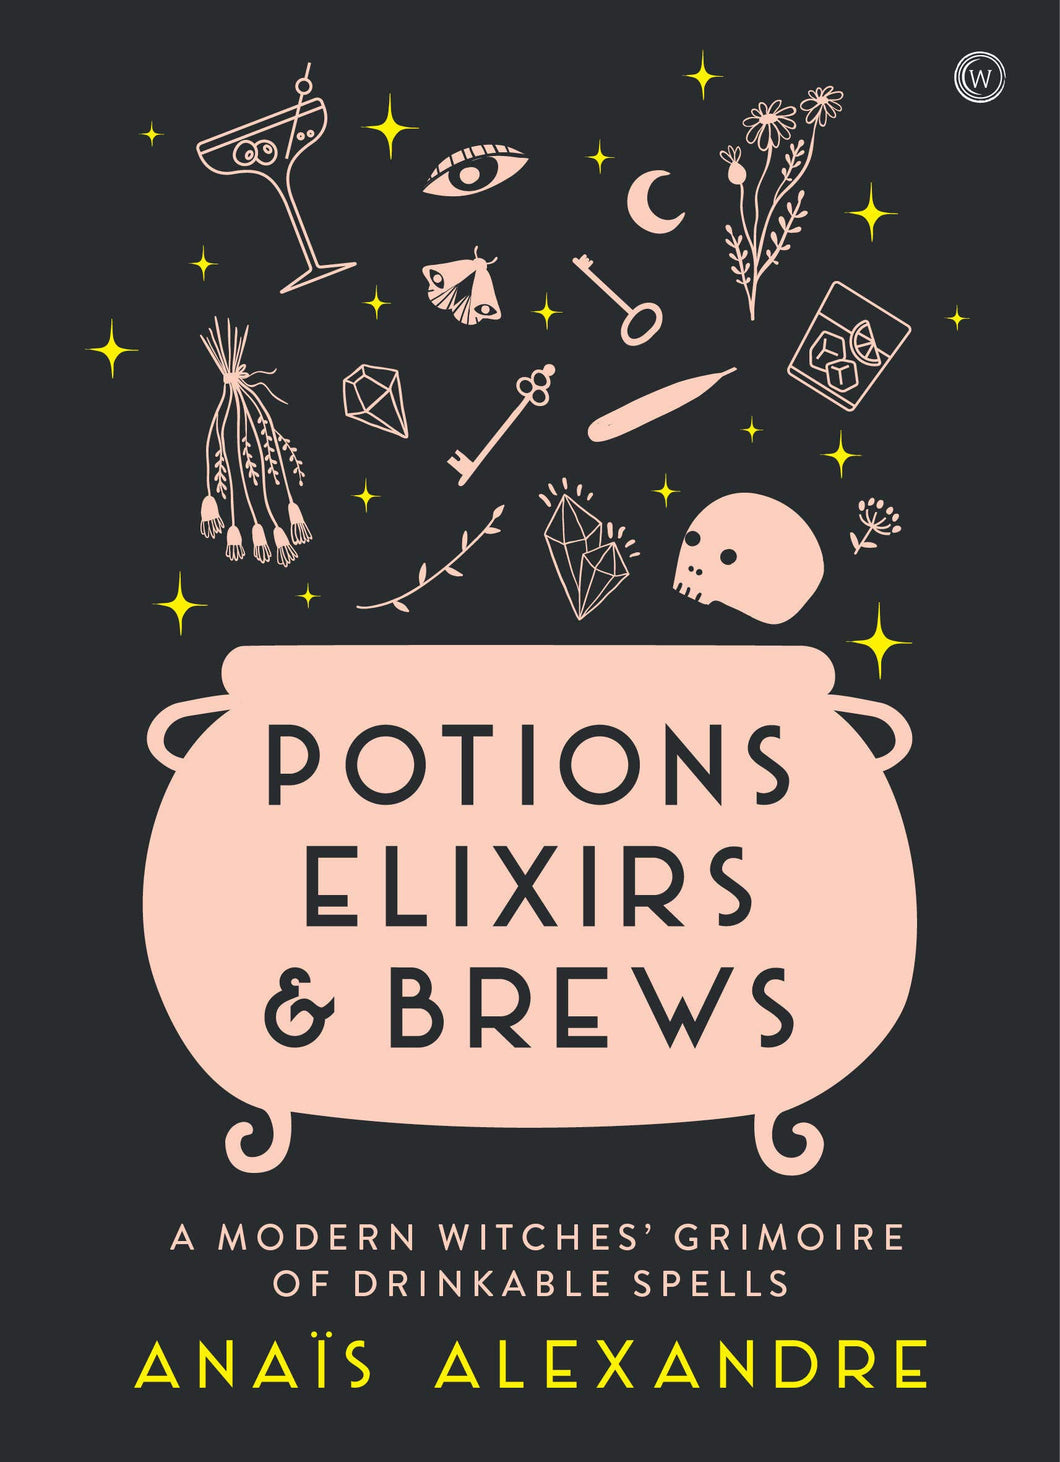 Potions, Elixirs & Brews by Anais Alexandre